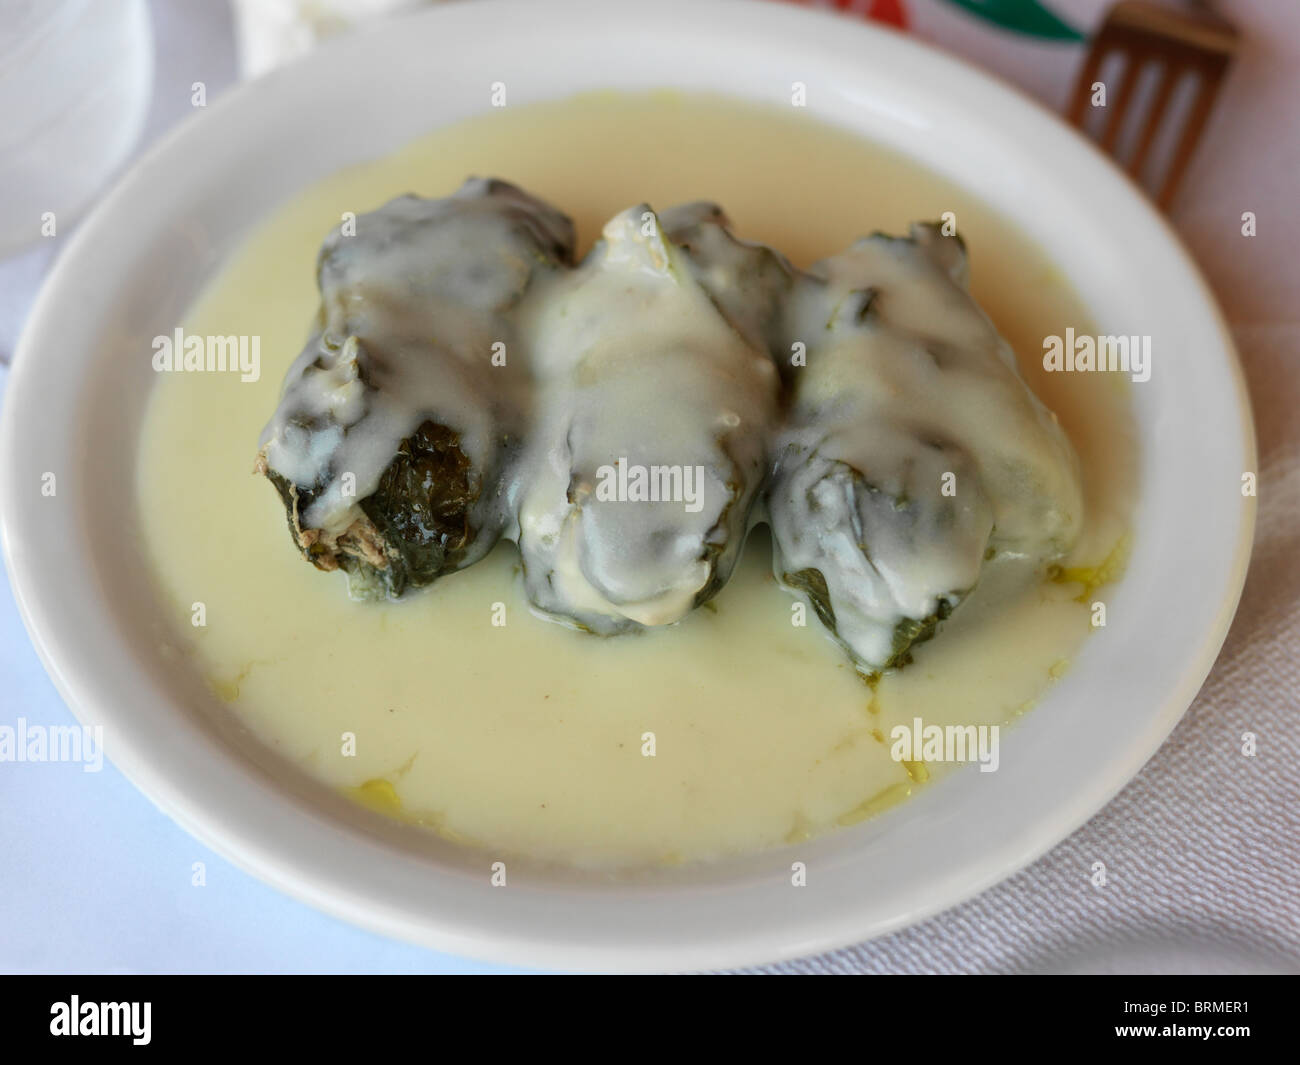 Mykali Samos Greece Plate Of Dolmades Vine Leaves Wrapped Around Rice And Herbs With A Lemon And Egg Sauce Stock Photo